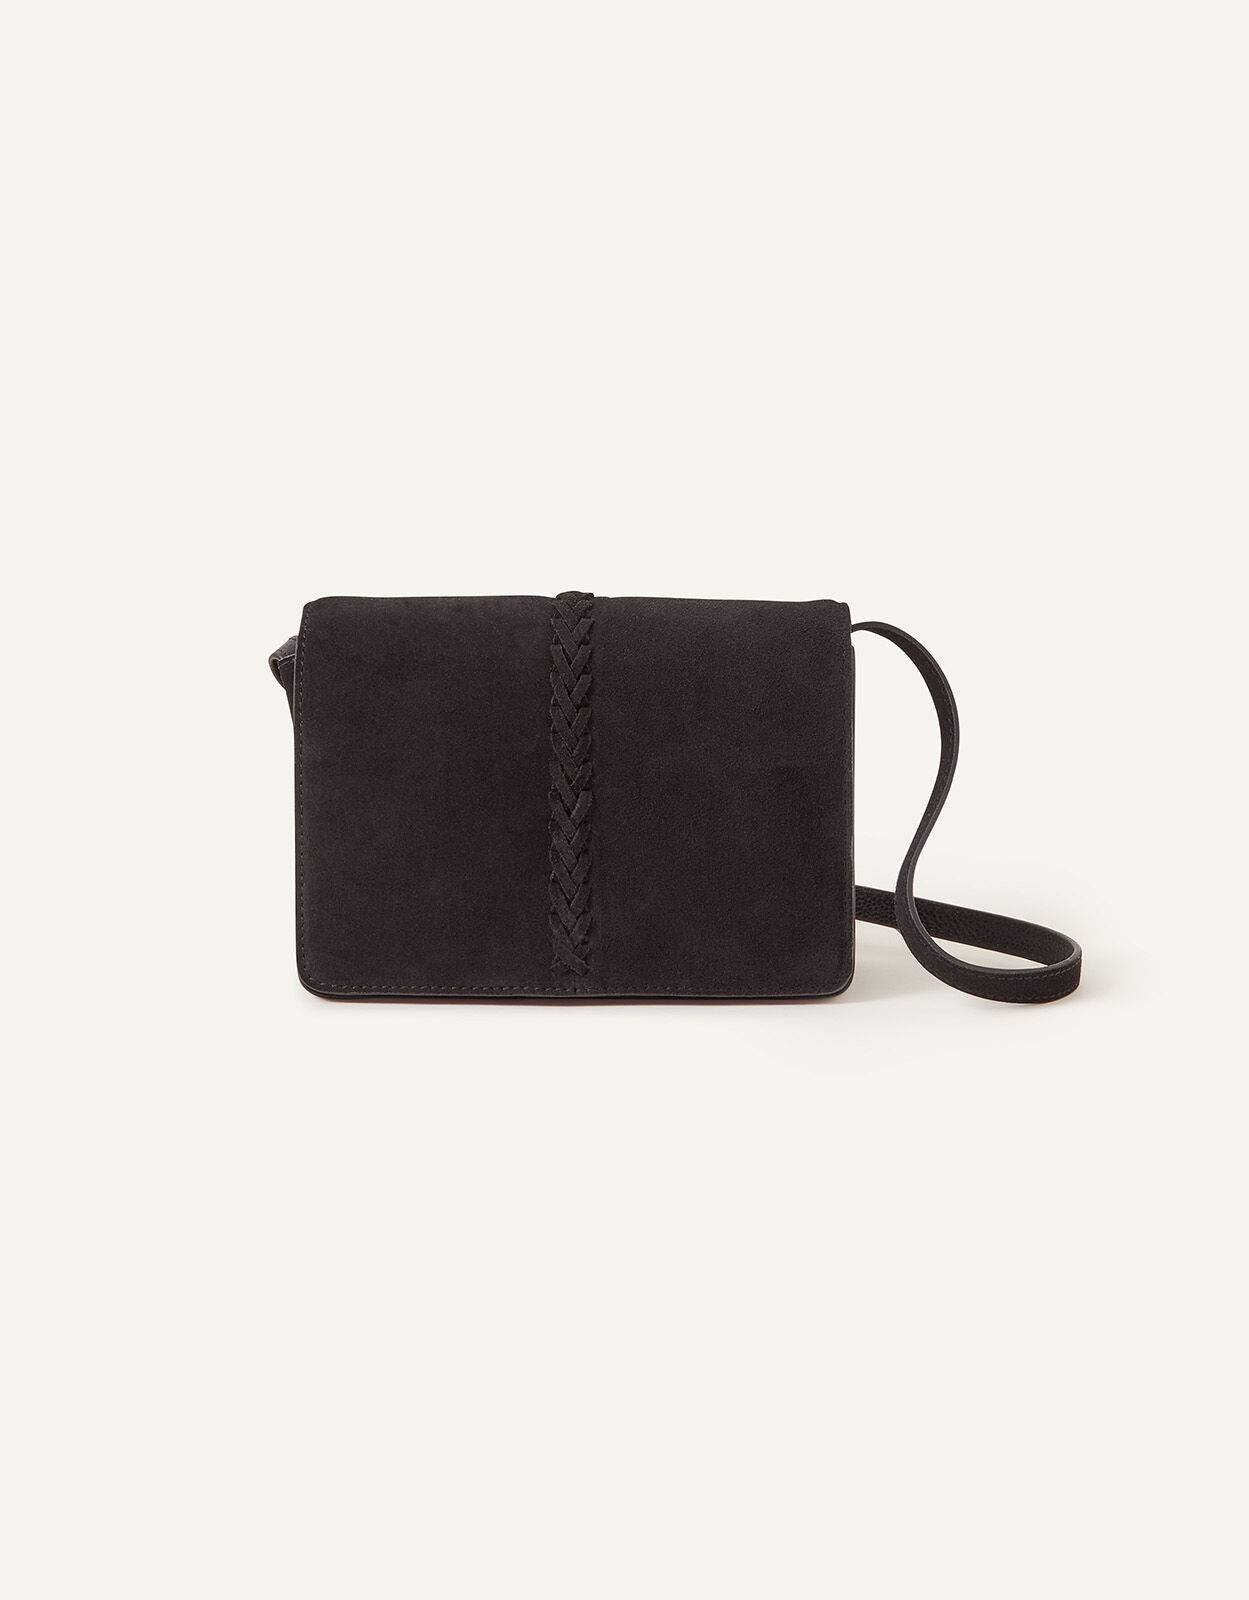 Buy Phase Eight Wendie Black Suede Envelope Clutch Bag from the Next UK  online shop | Clutch bag, Envelope clutch bag, Evening clutch bag